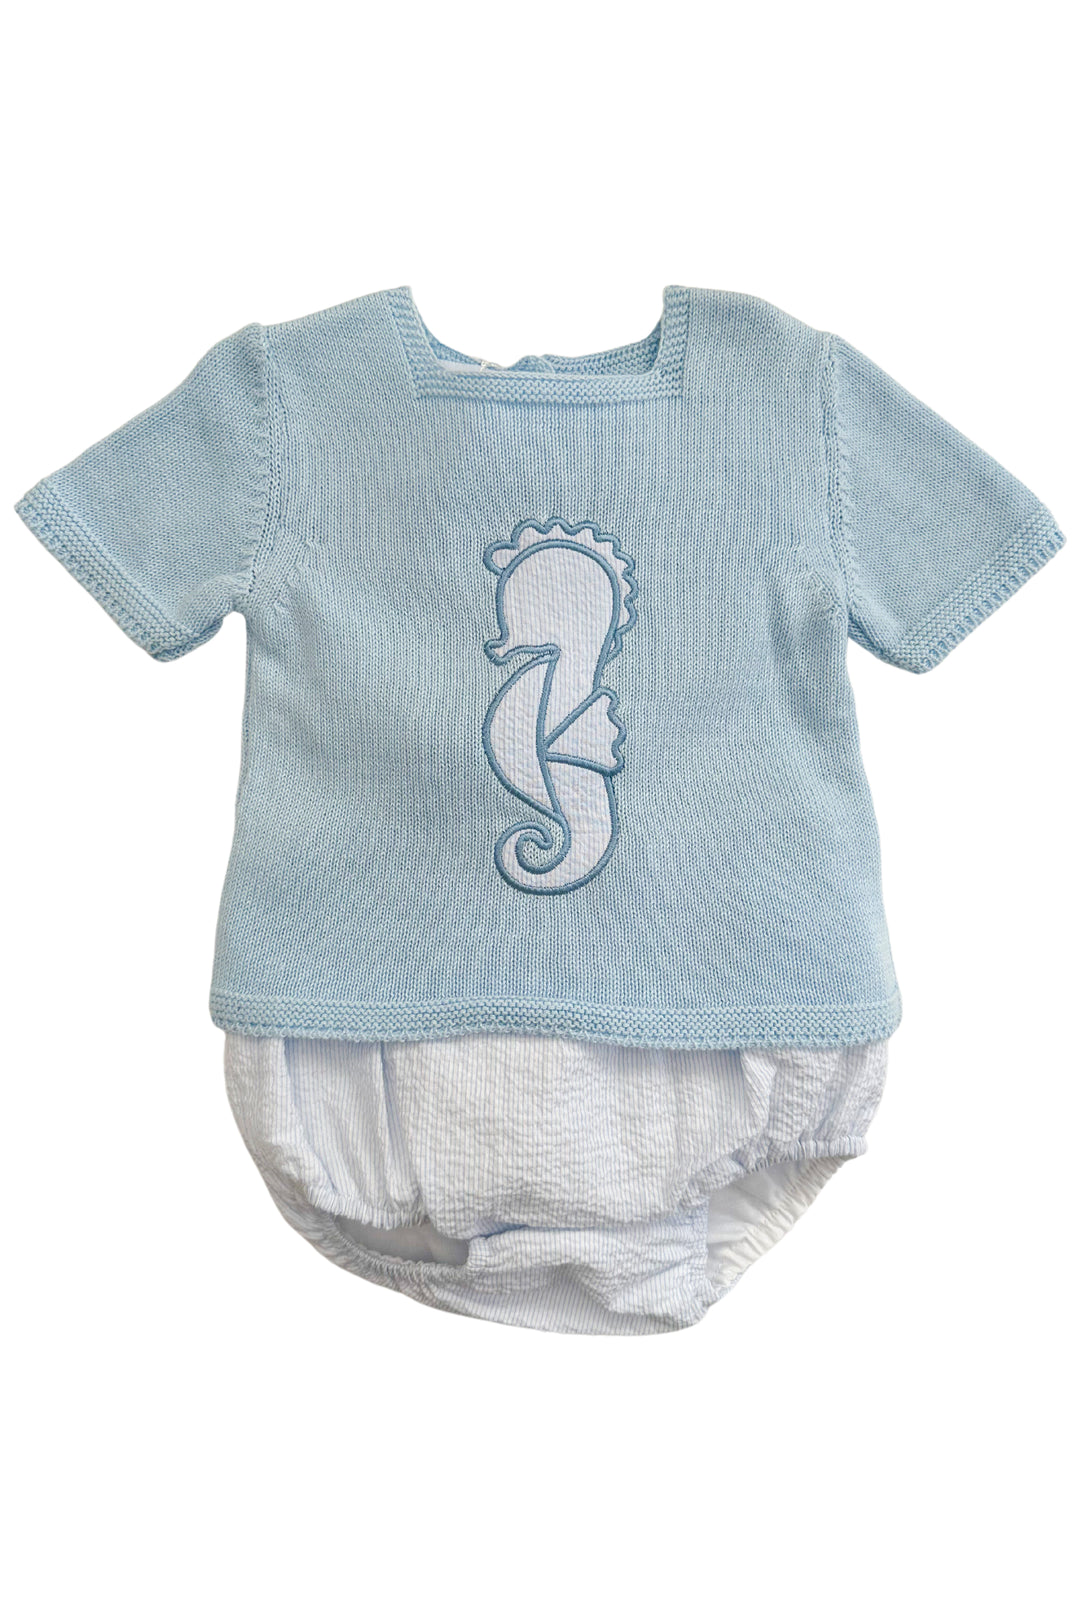 Foque PREORDER "Cove" Blue Knit Seahorse Top & Jam Pants | Millie and John